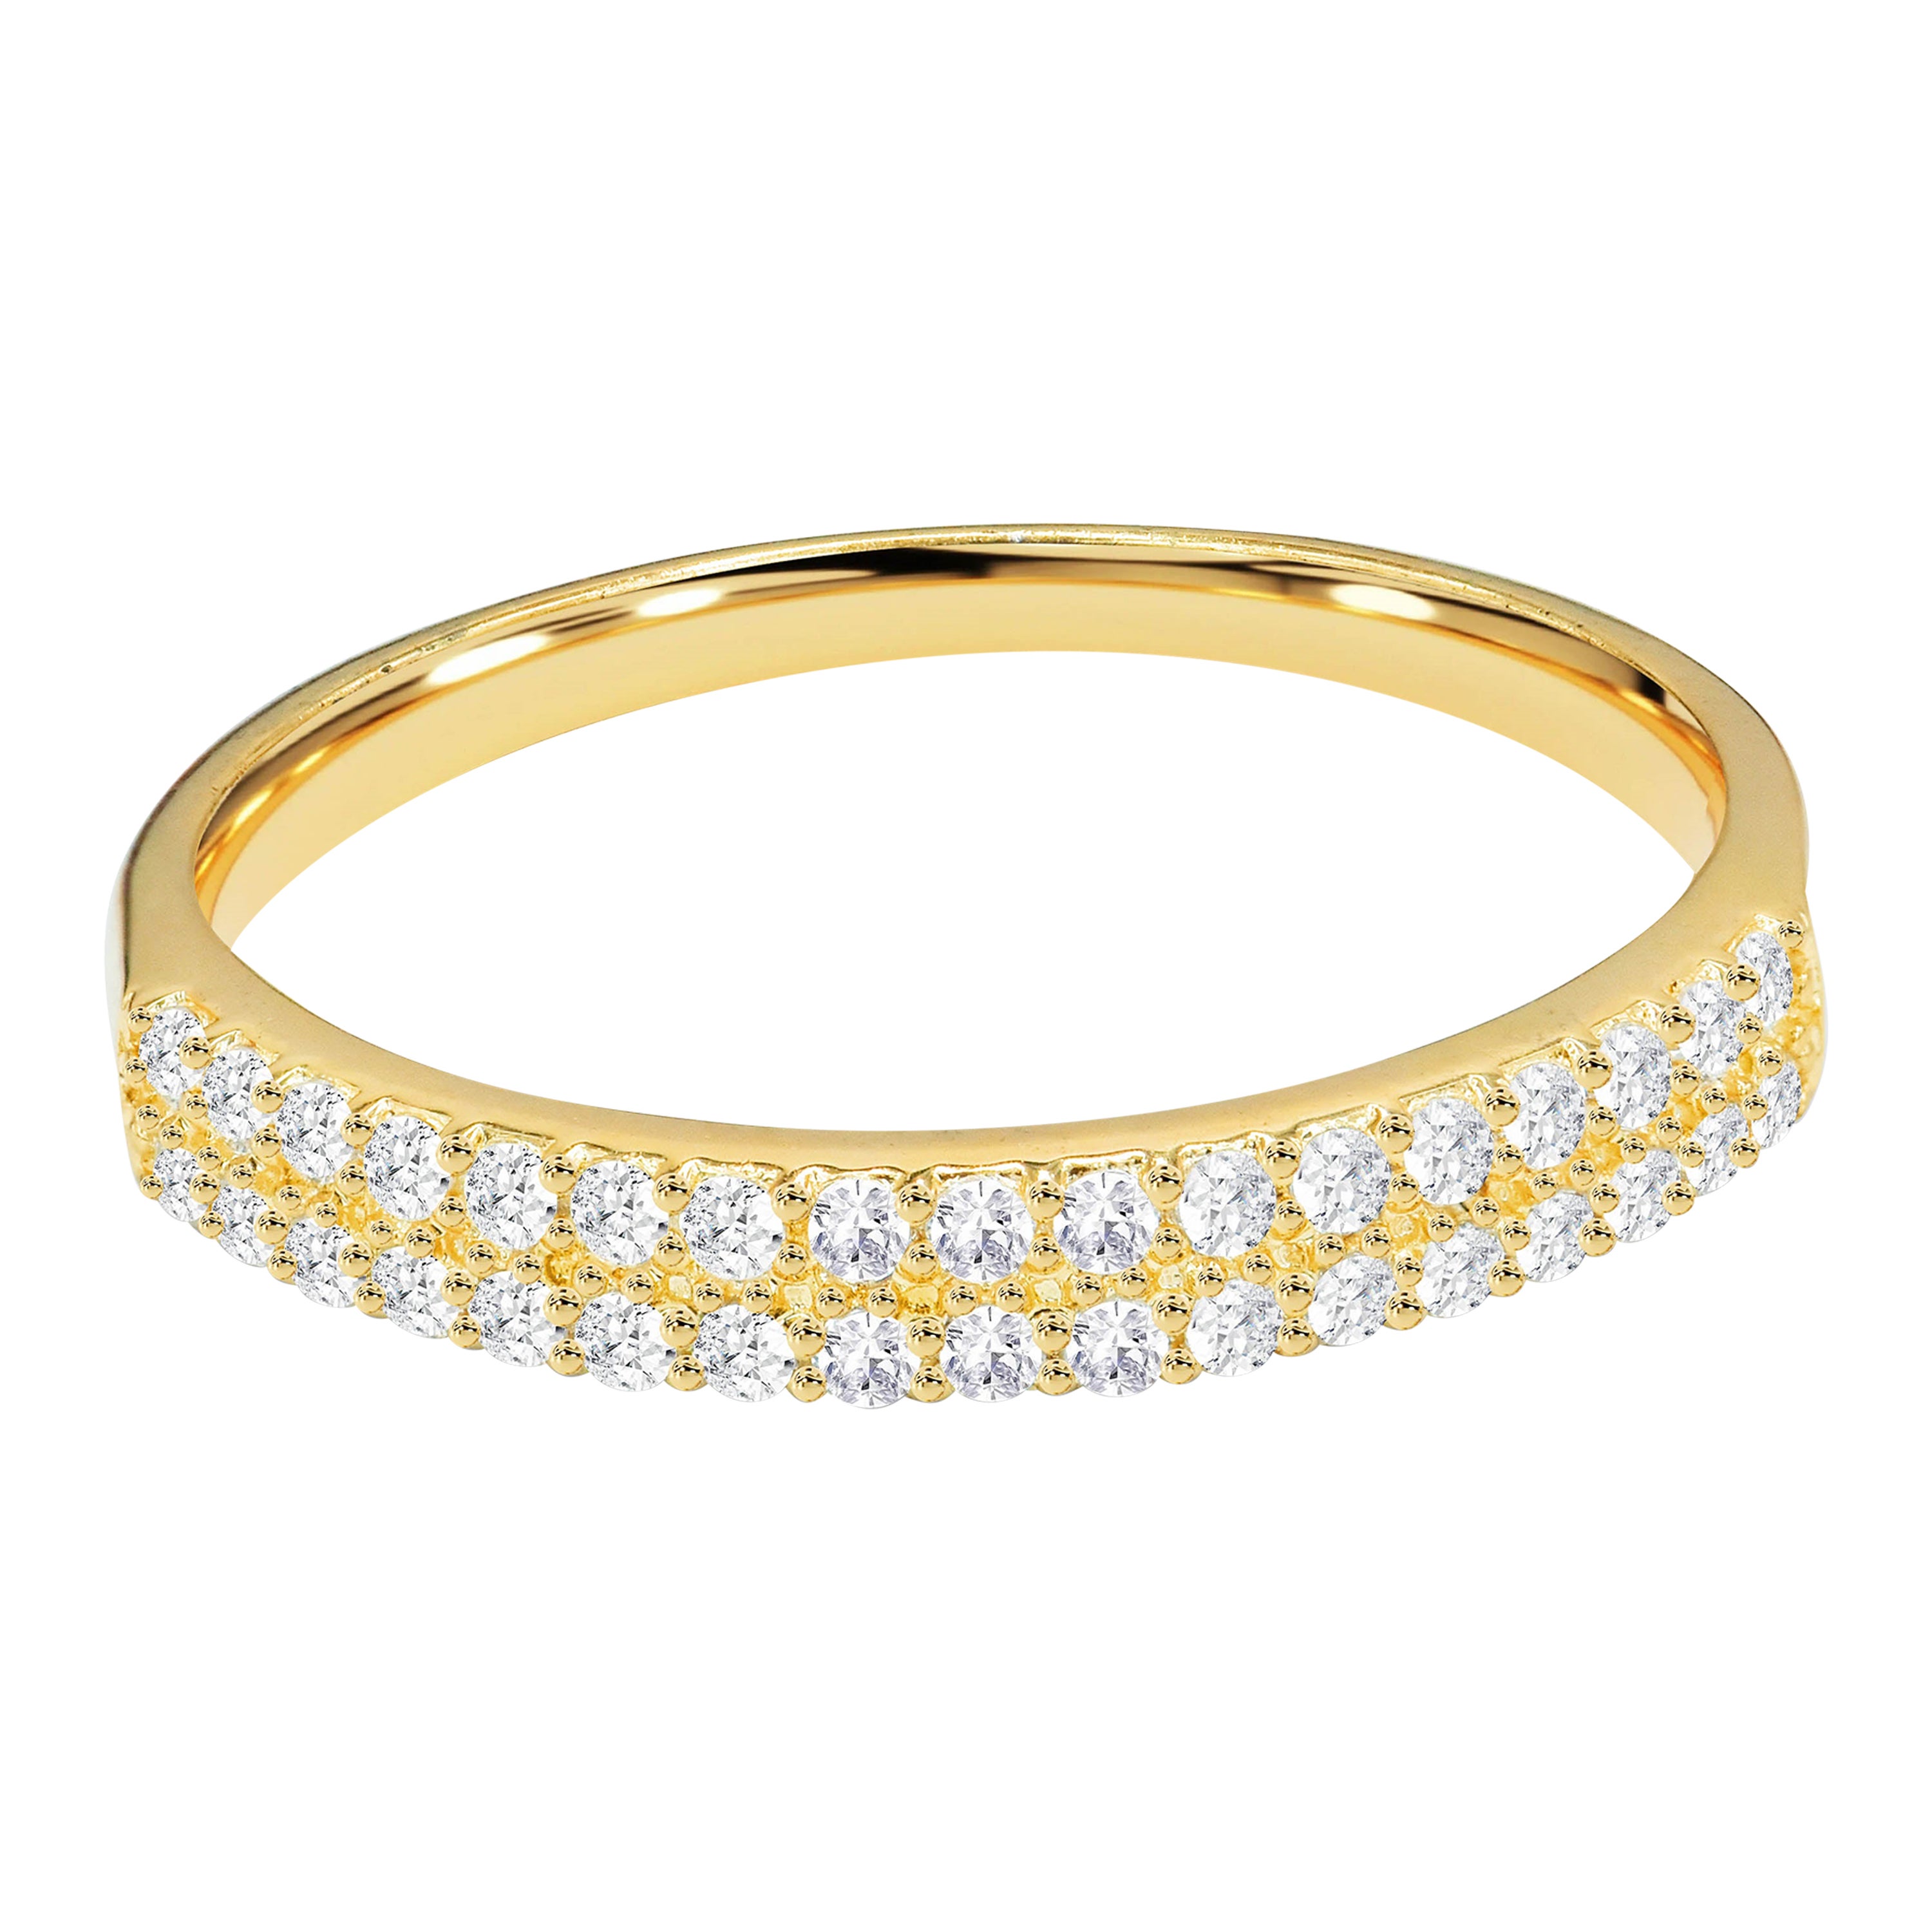 0.44 Ct Diamond Eternity Ring Band in 14K Gold